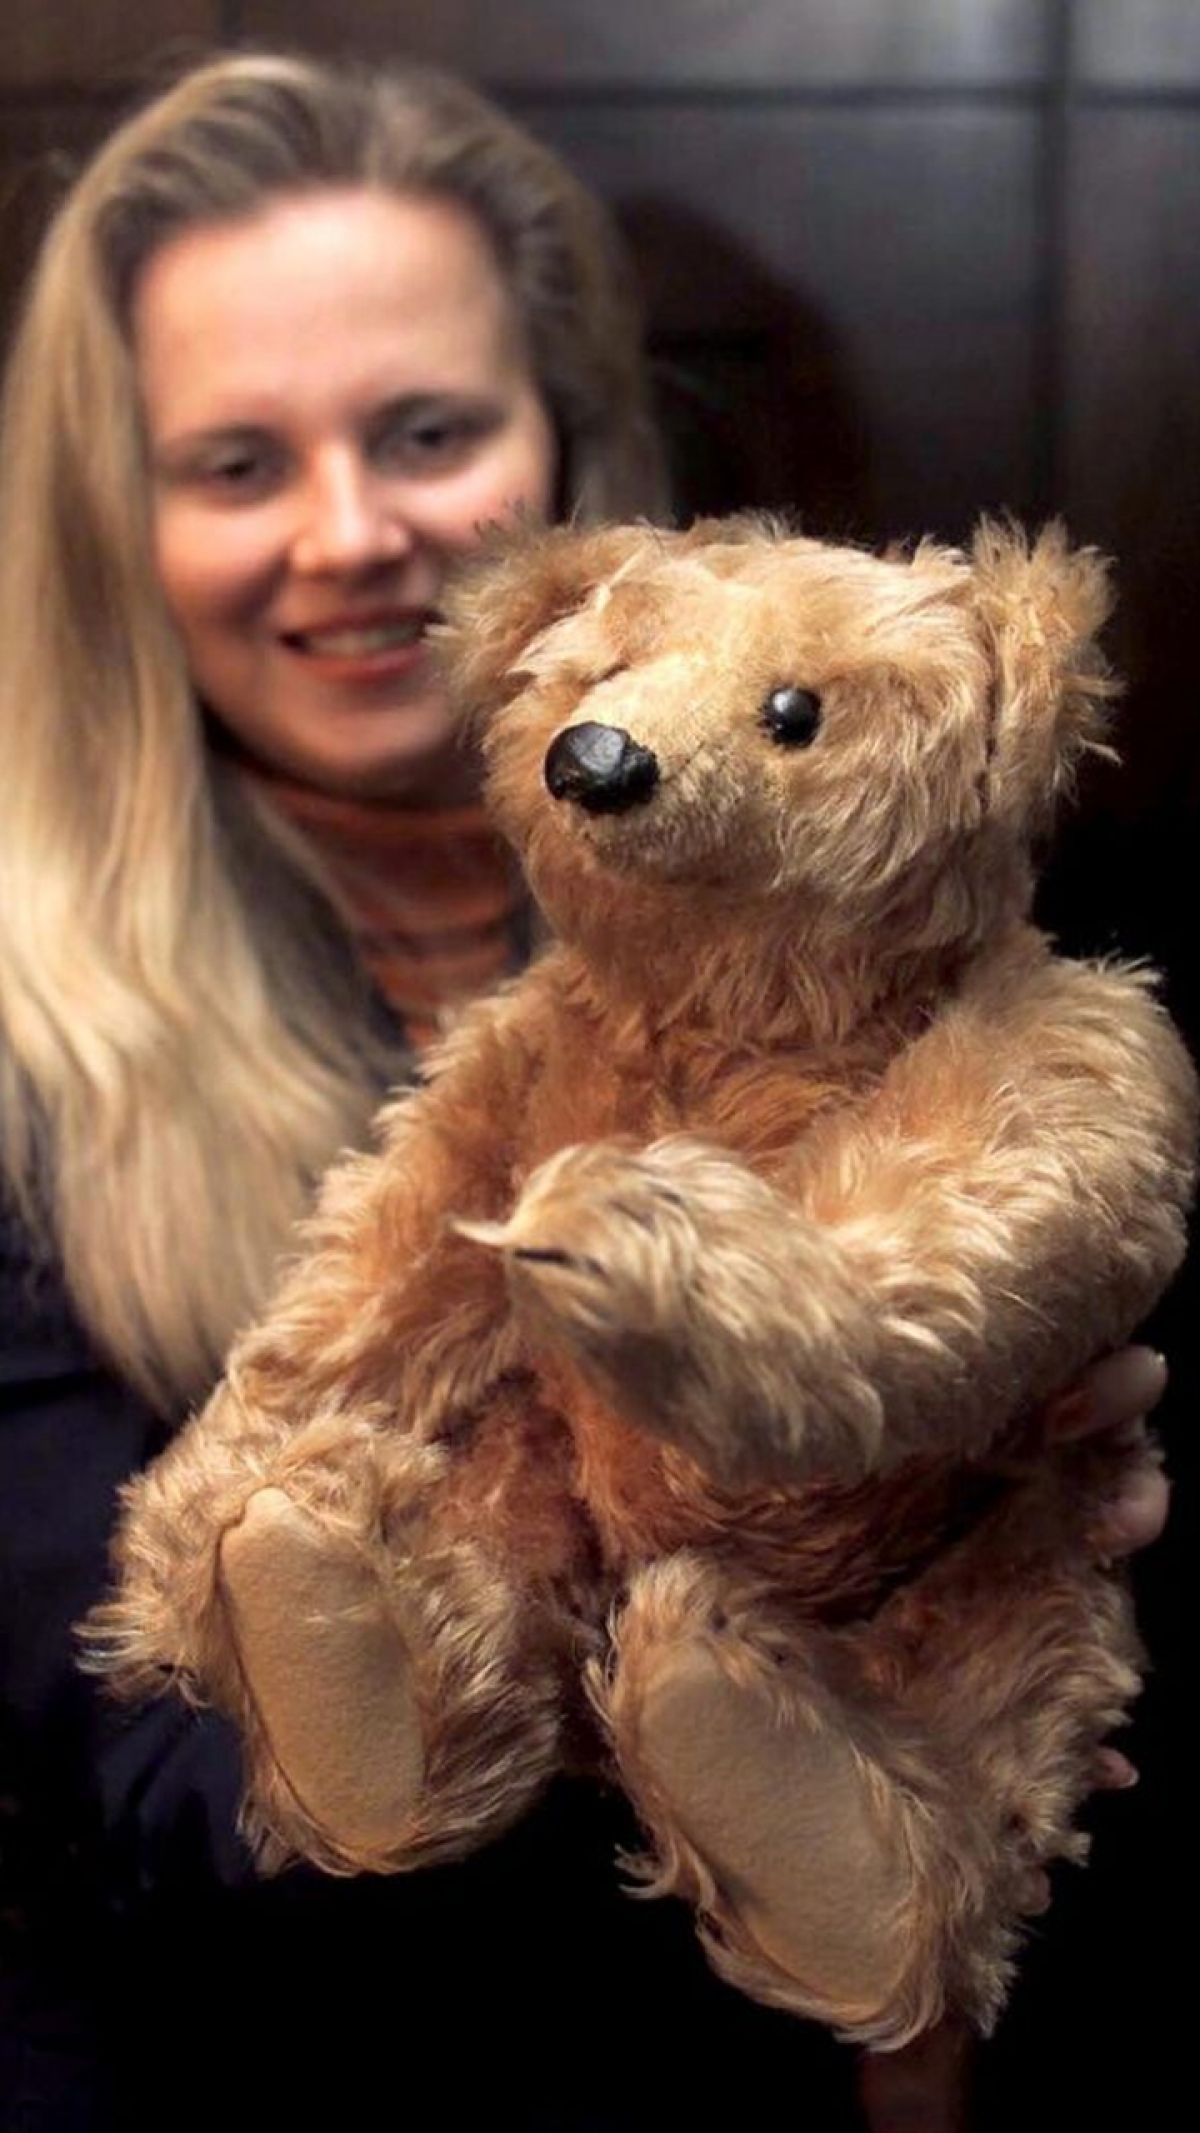 Lastpiece Einzug - Steiff Louis Vuitton Teddy Bear – $2.1 Million This one  remains to be the most popular and expensive teddy bear in the world. There  has never been a better 